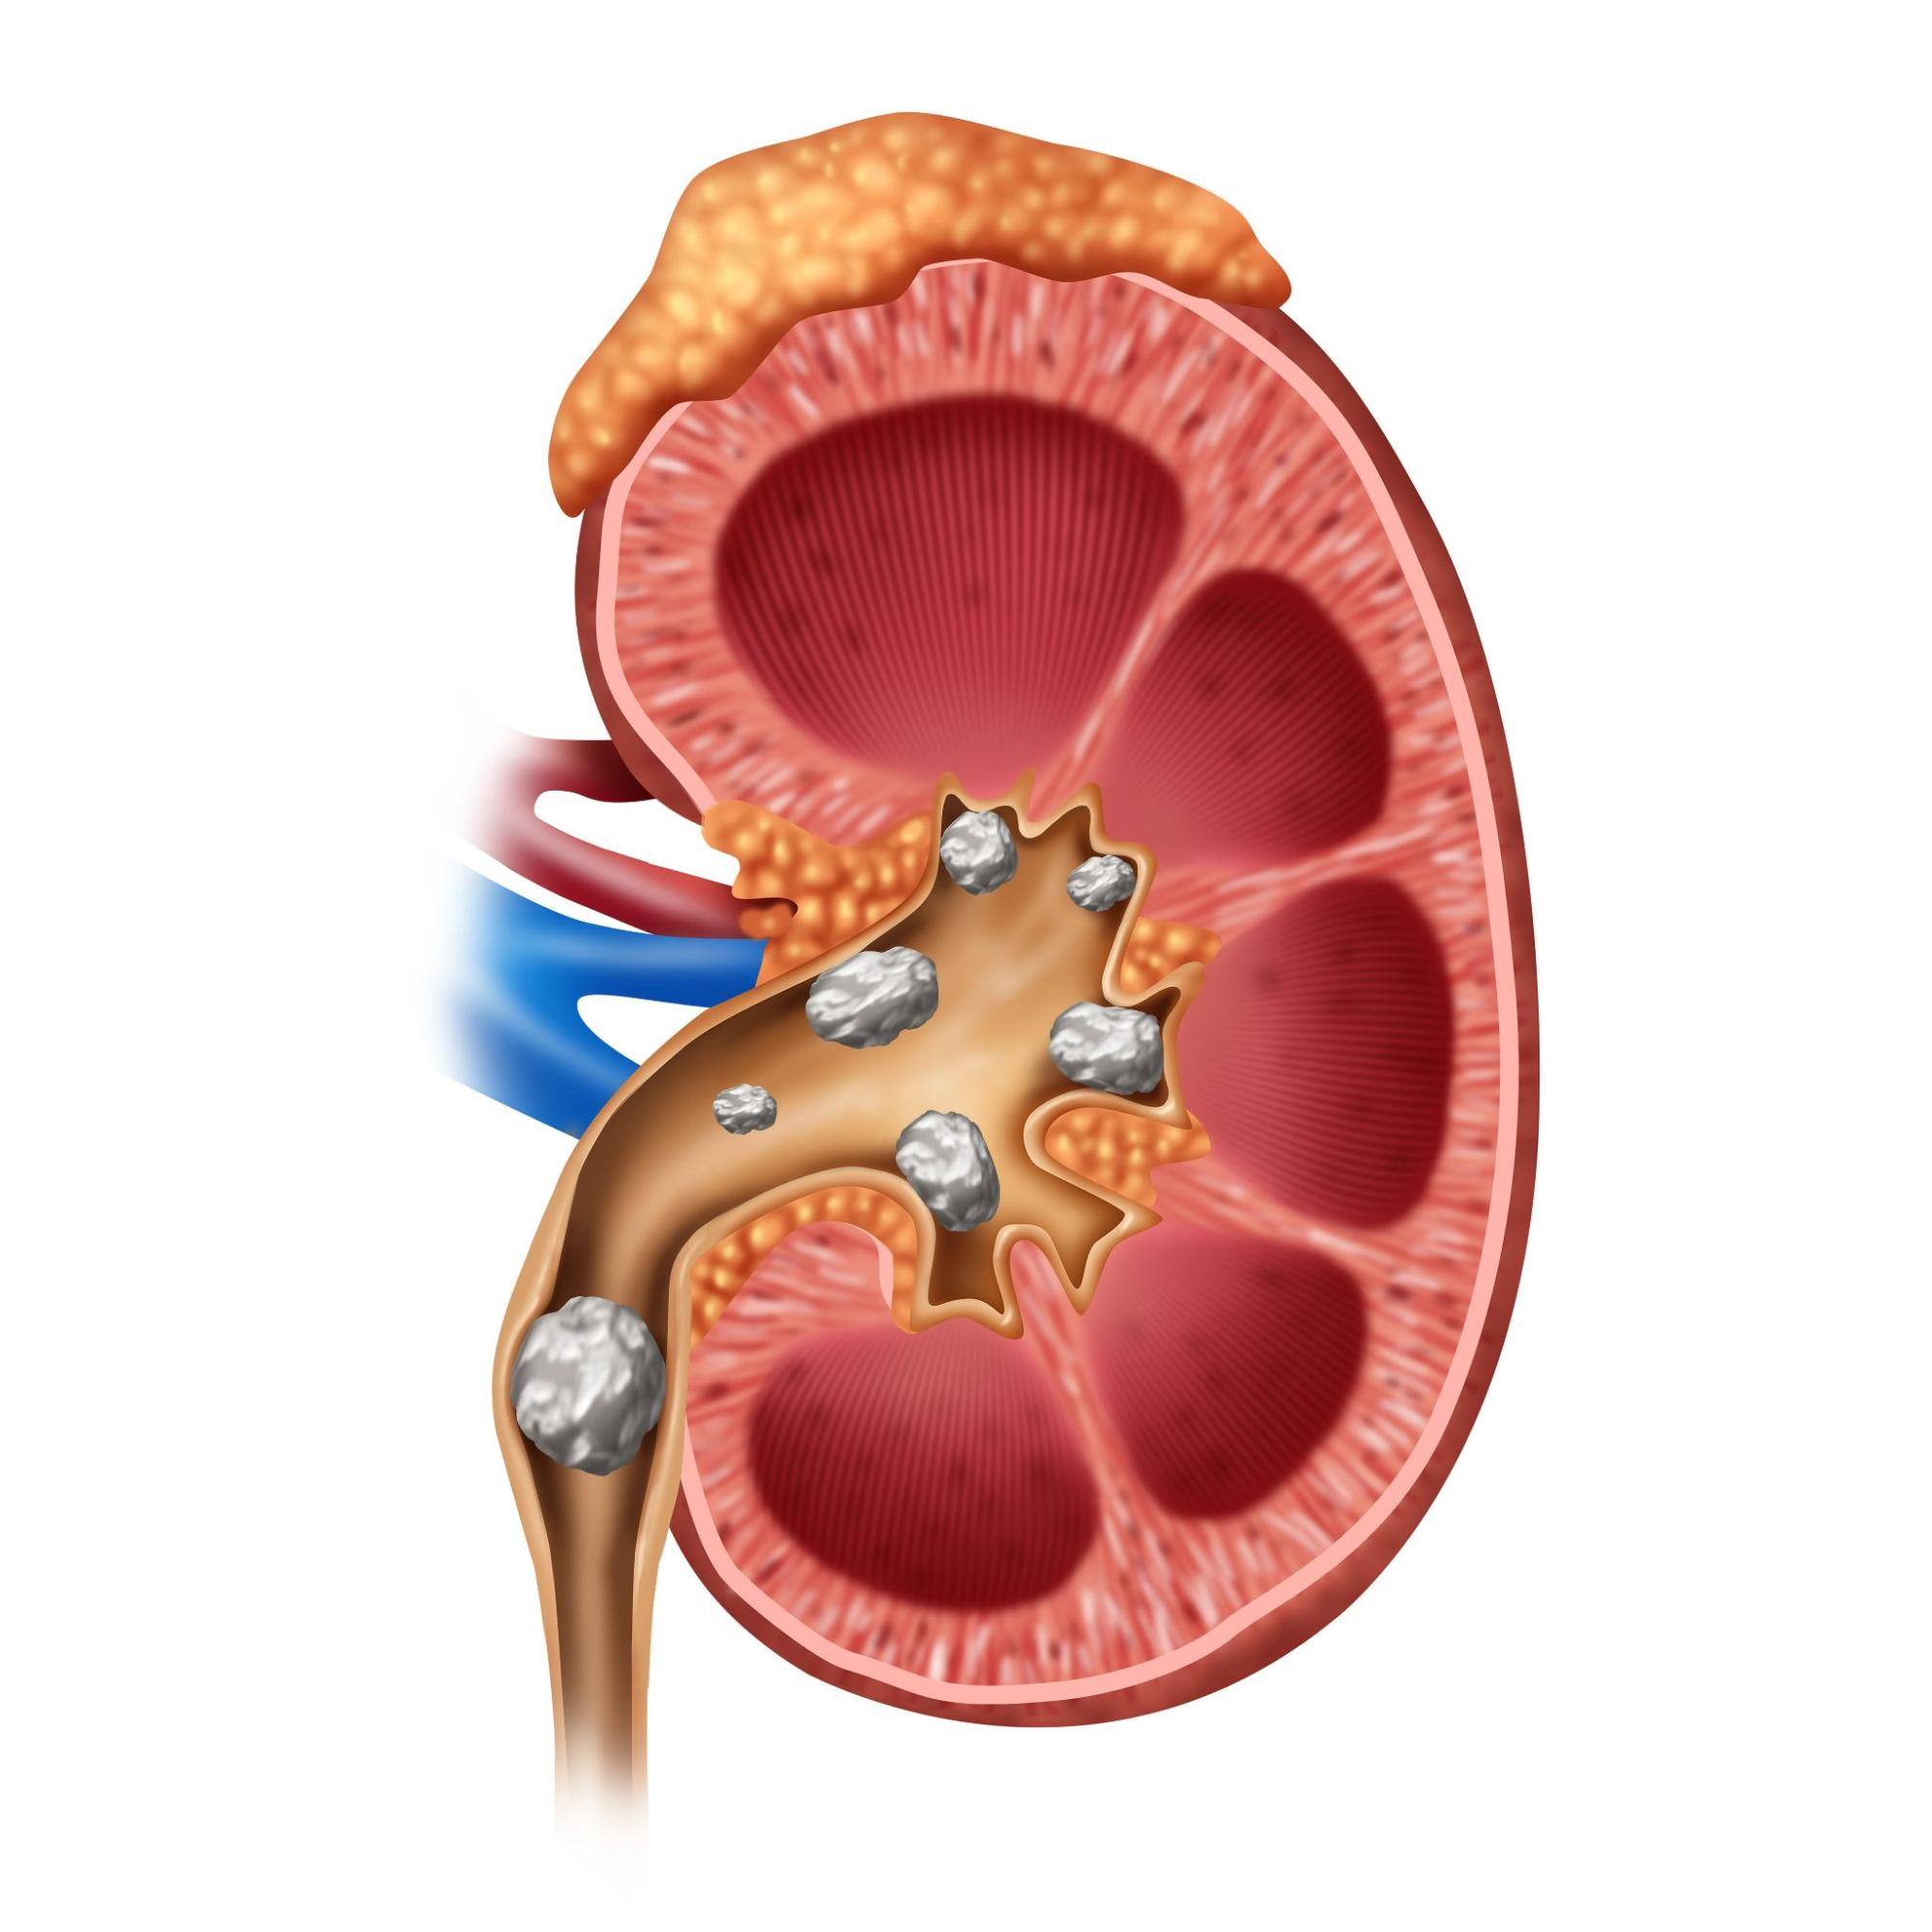 Kidney Stone – The Most Painful Urological Disorder: Prevalence and Risk Factors